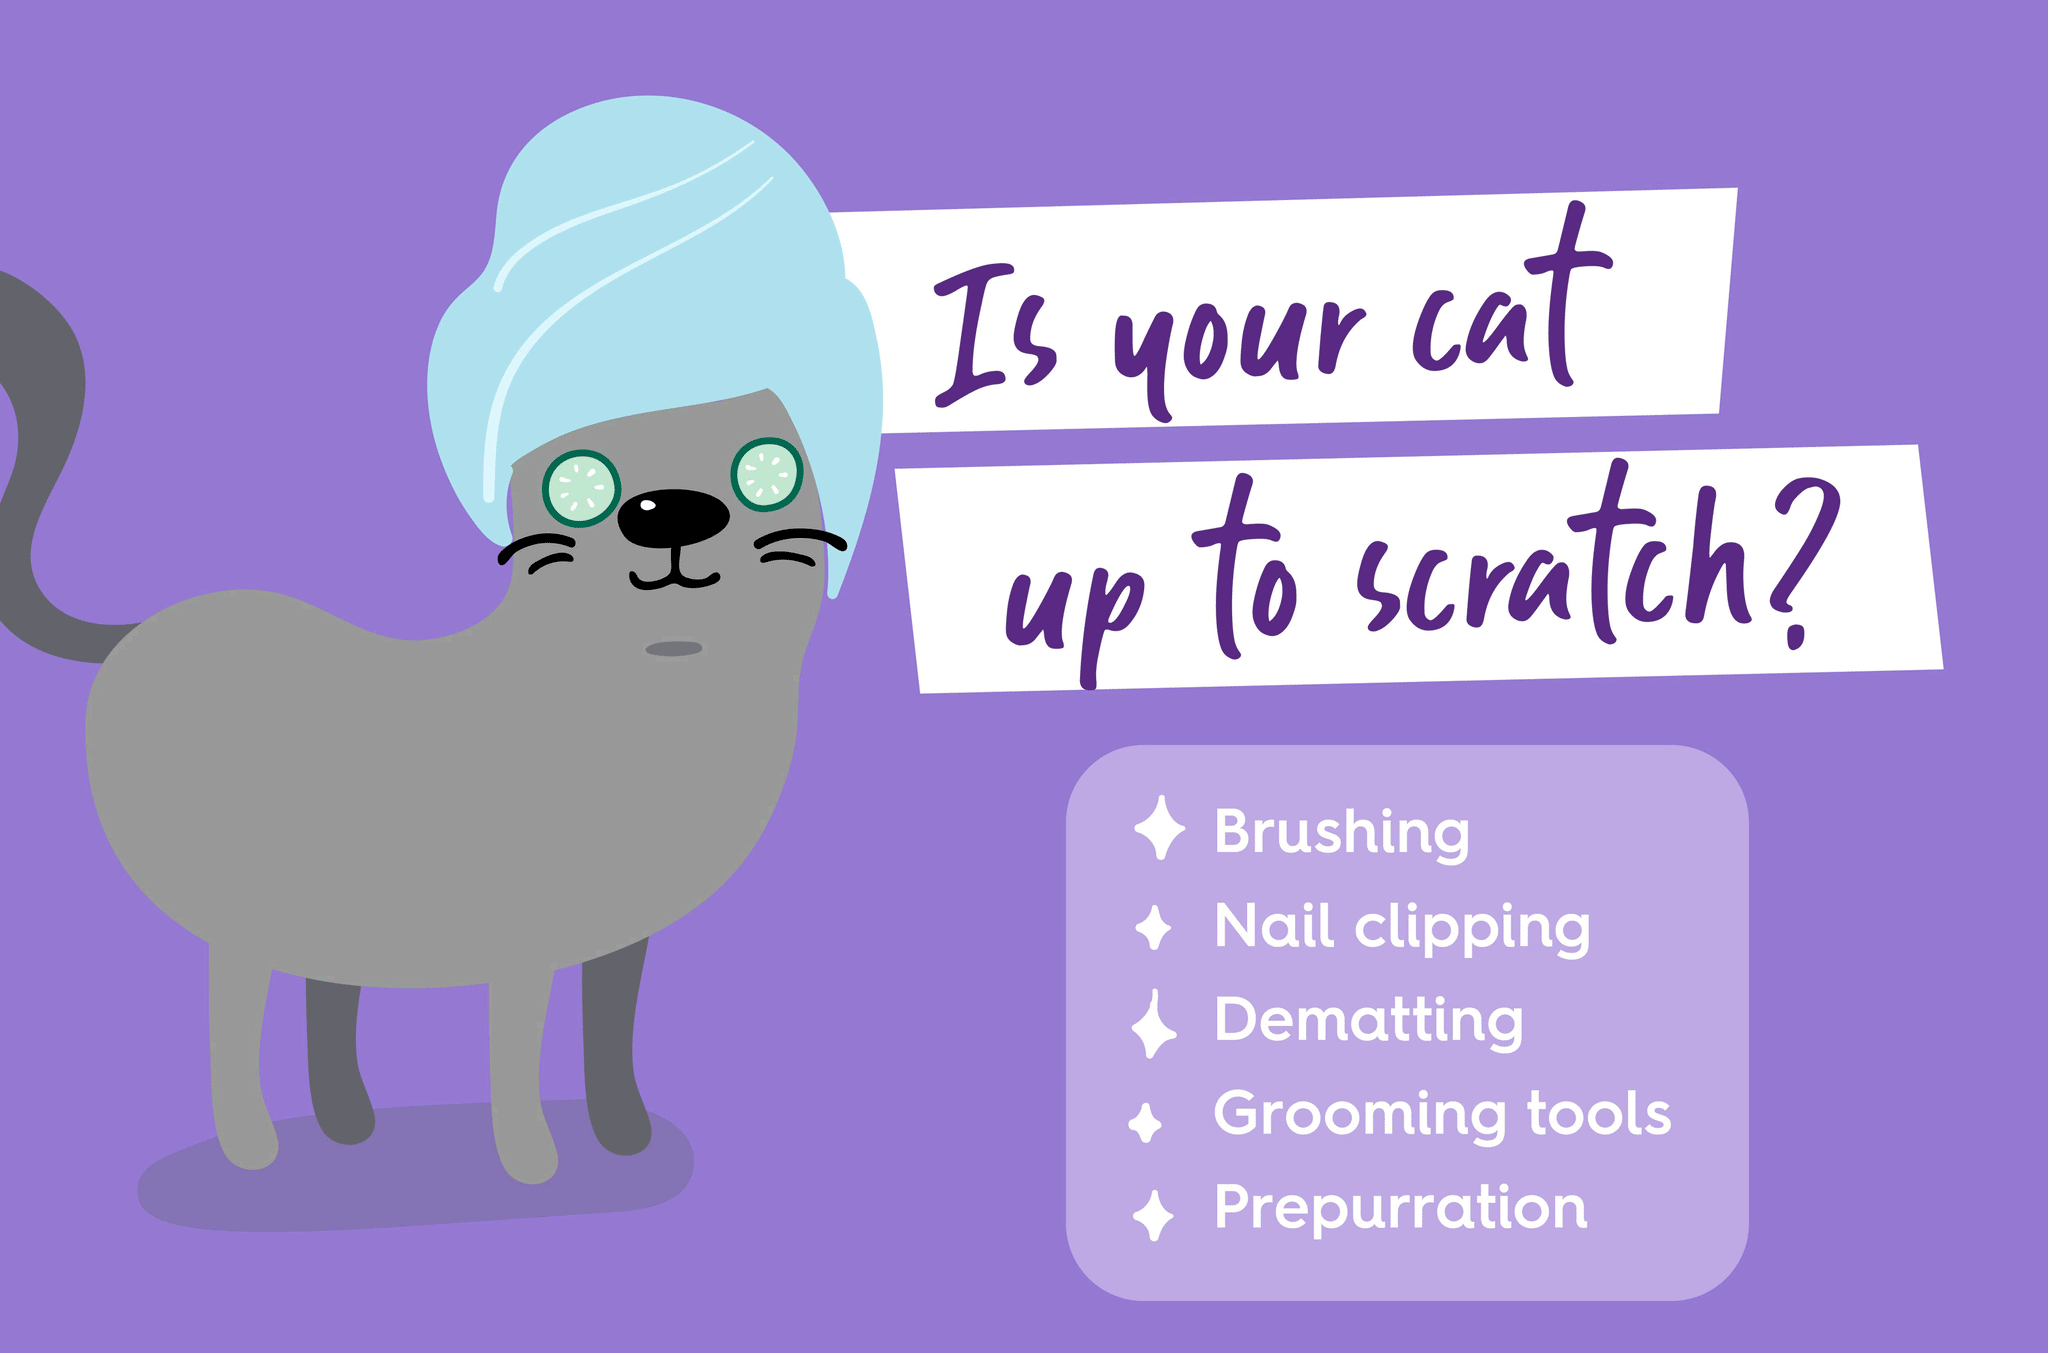 Is your cat up to scratch?